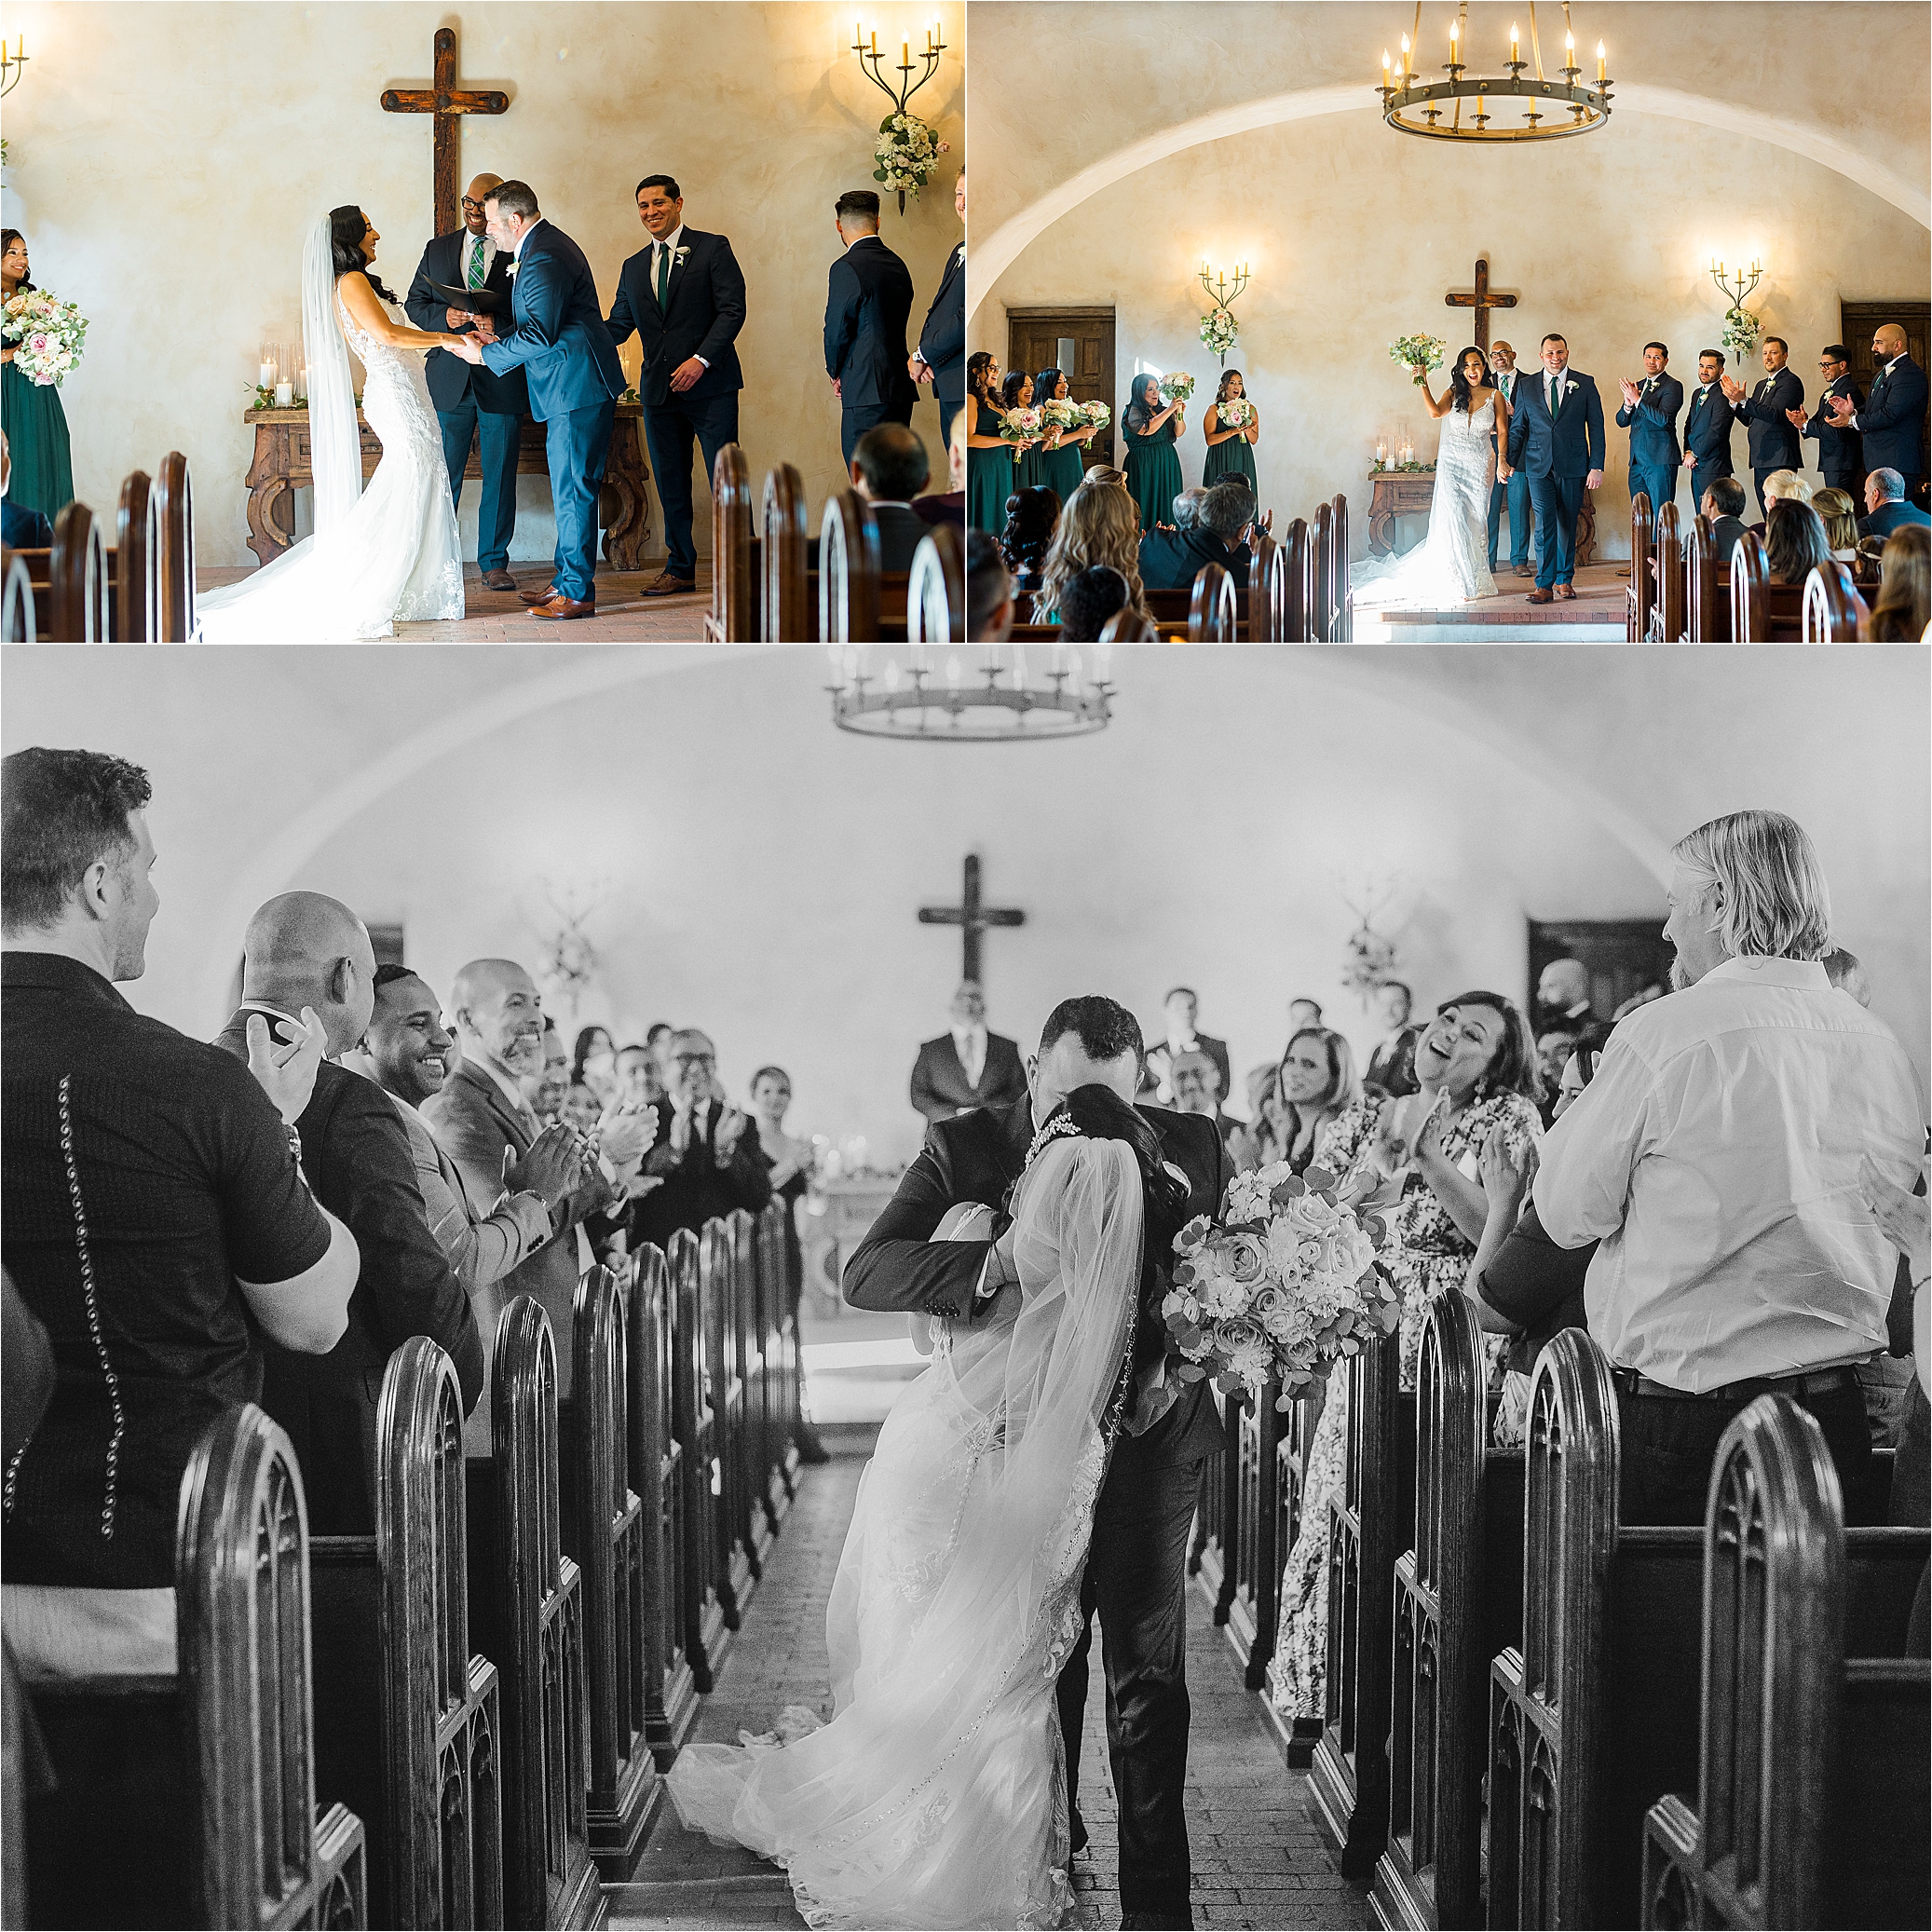 A bride and groom kiss down the aisle on their wedding day at Lost Mission near San Antonio, Texas 